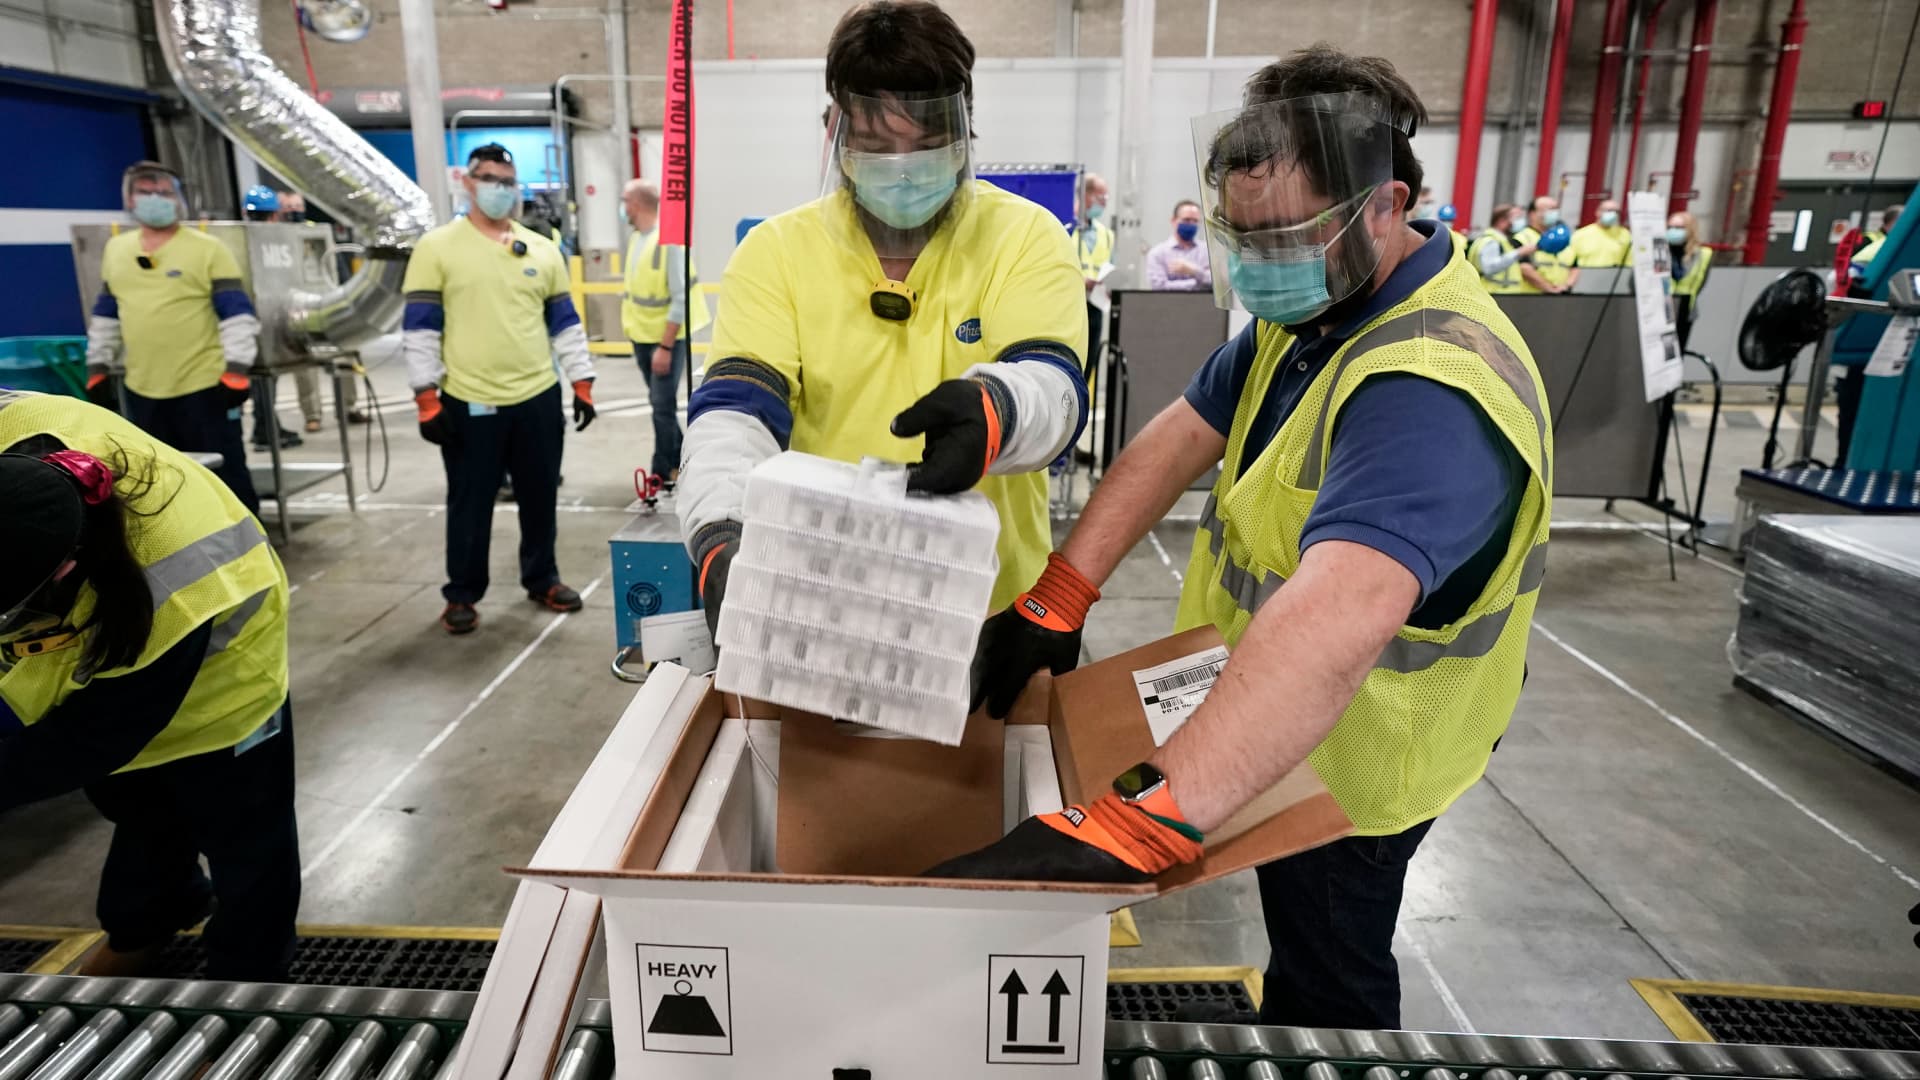 Boxes containing the Pfizer-BioNTech Covid vaccine are prepared to be shipped at the Pfizer Global Supply Kalamazoo manufacturing plant on December 13, 2020 in Portage, Michigan.